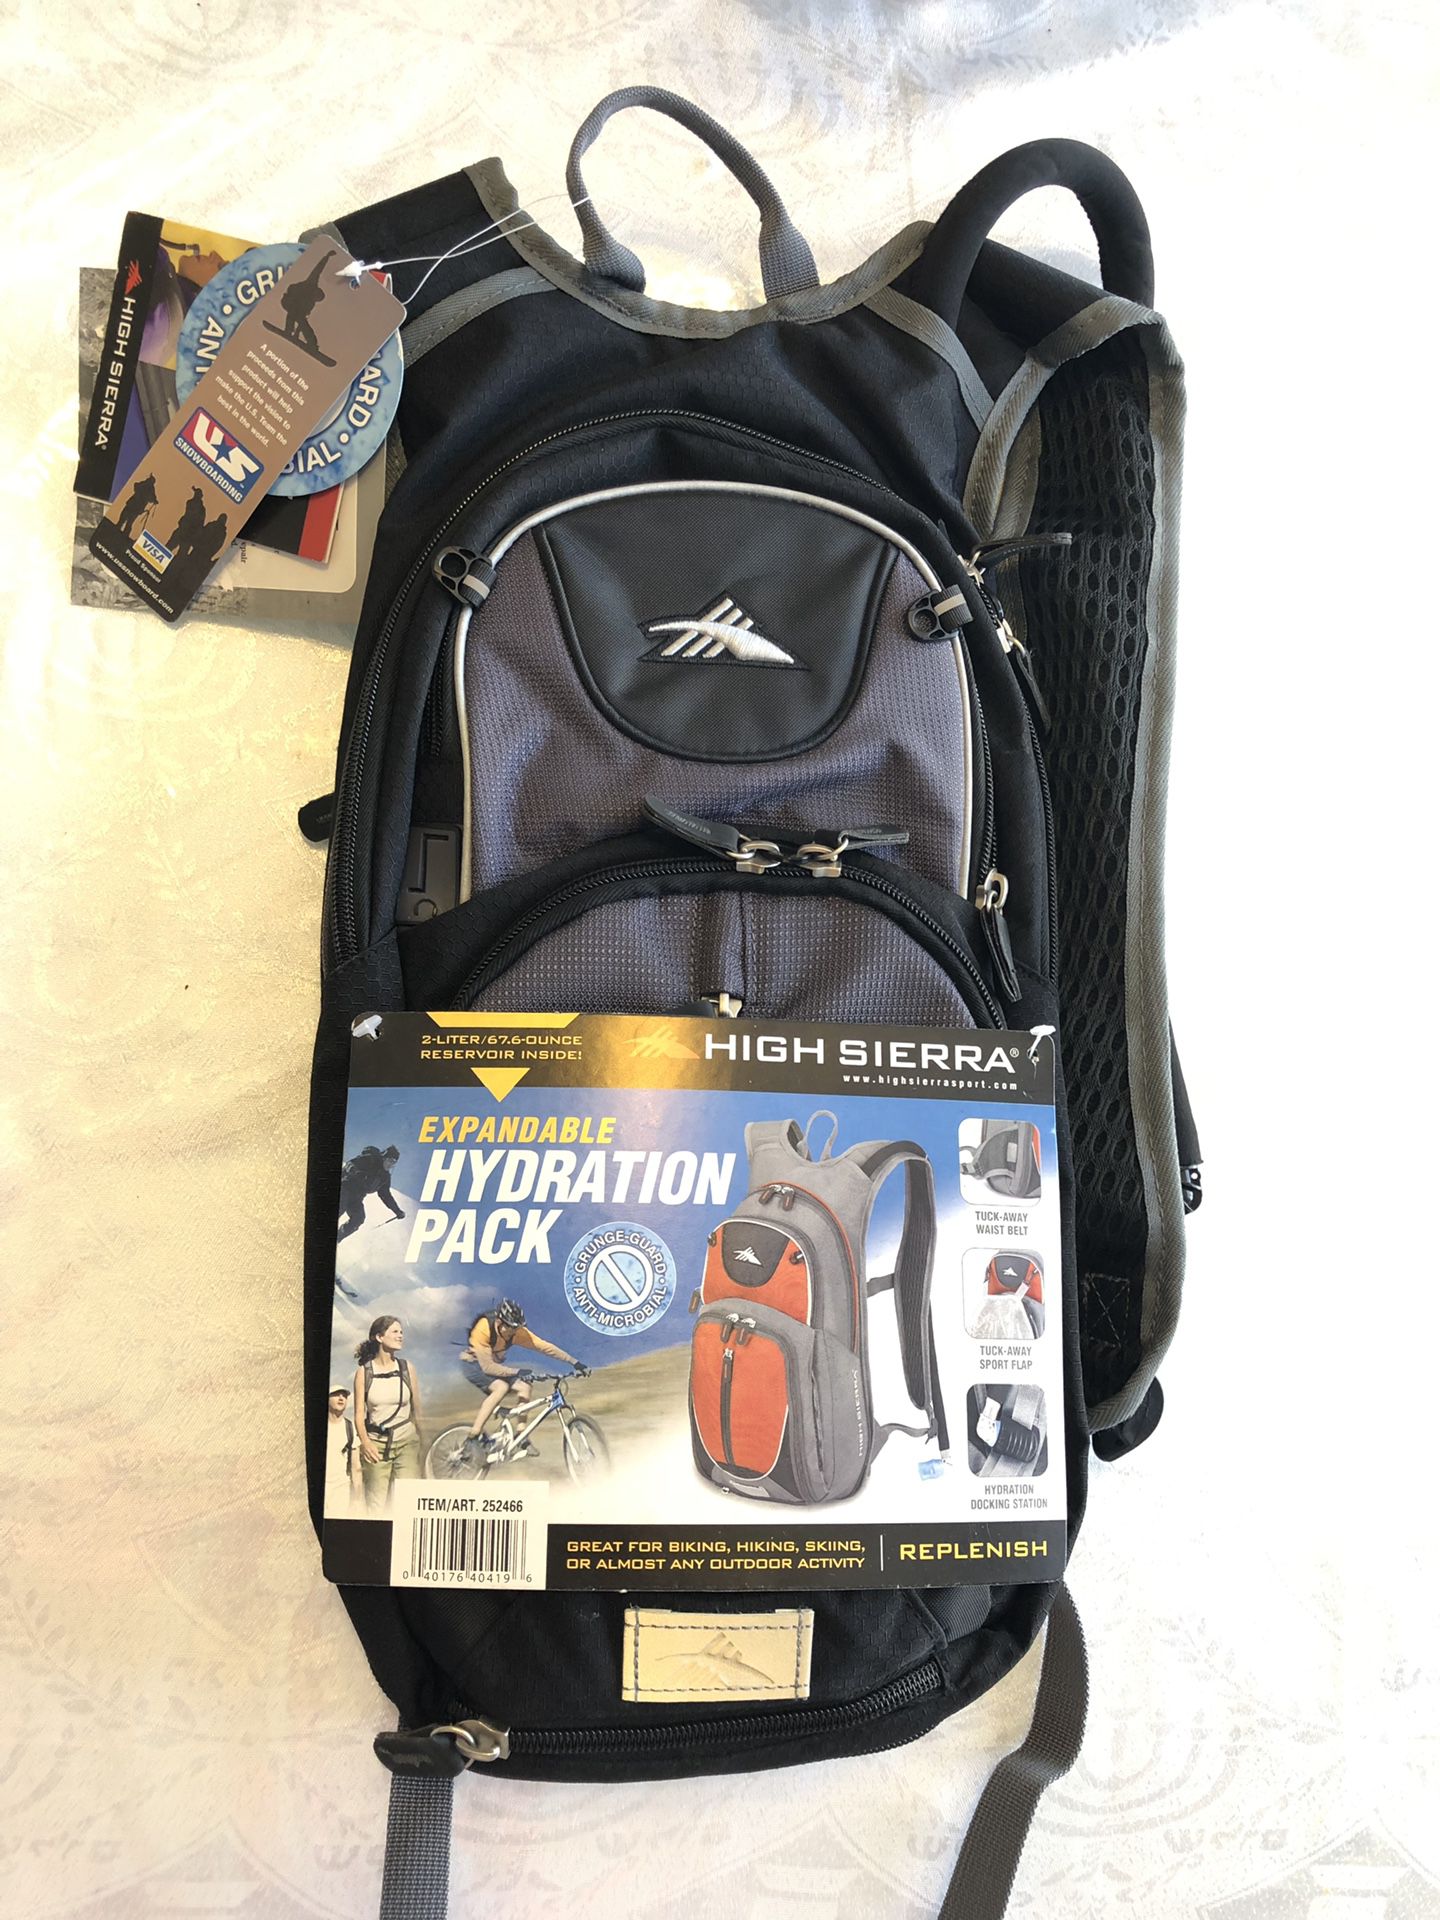 High Sierra Expandable Hydration Pack (Hiking Backpack) NEW!